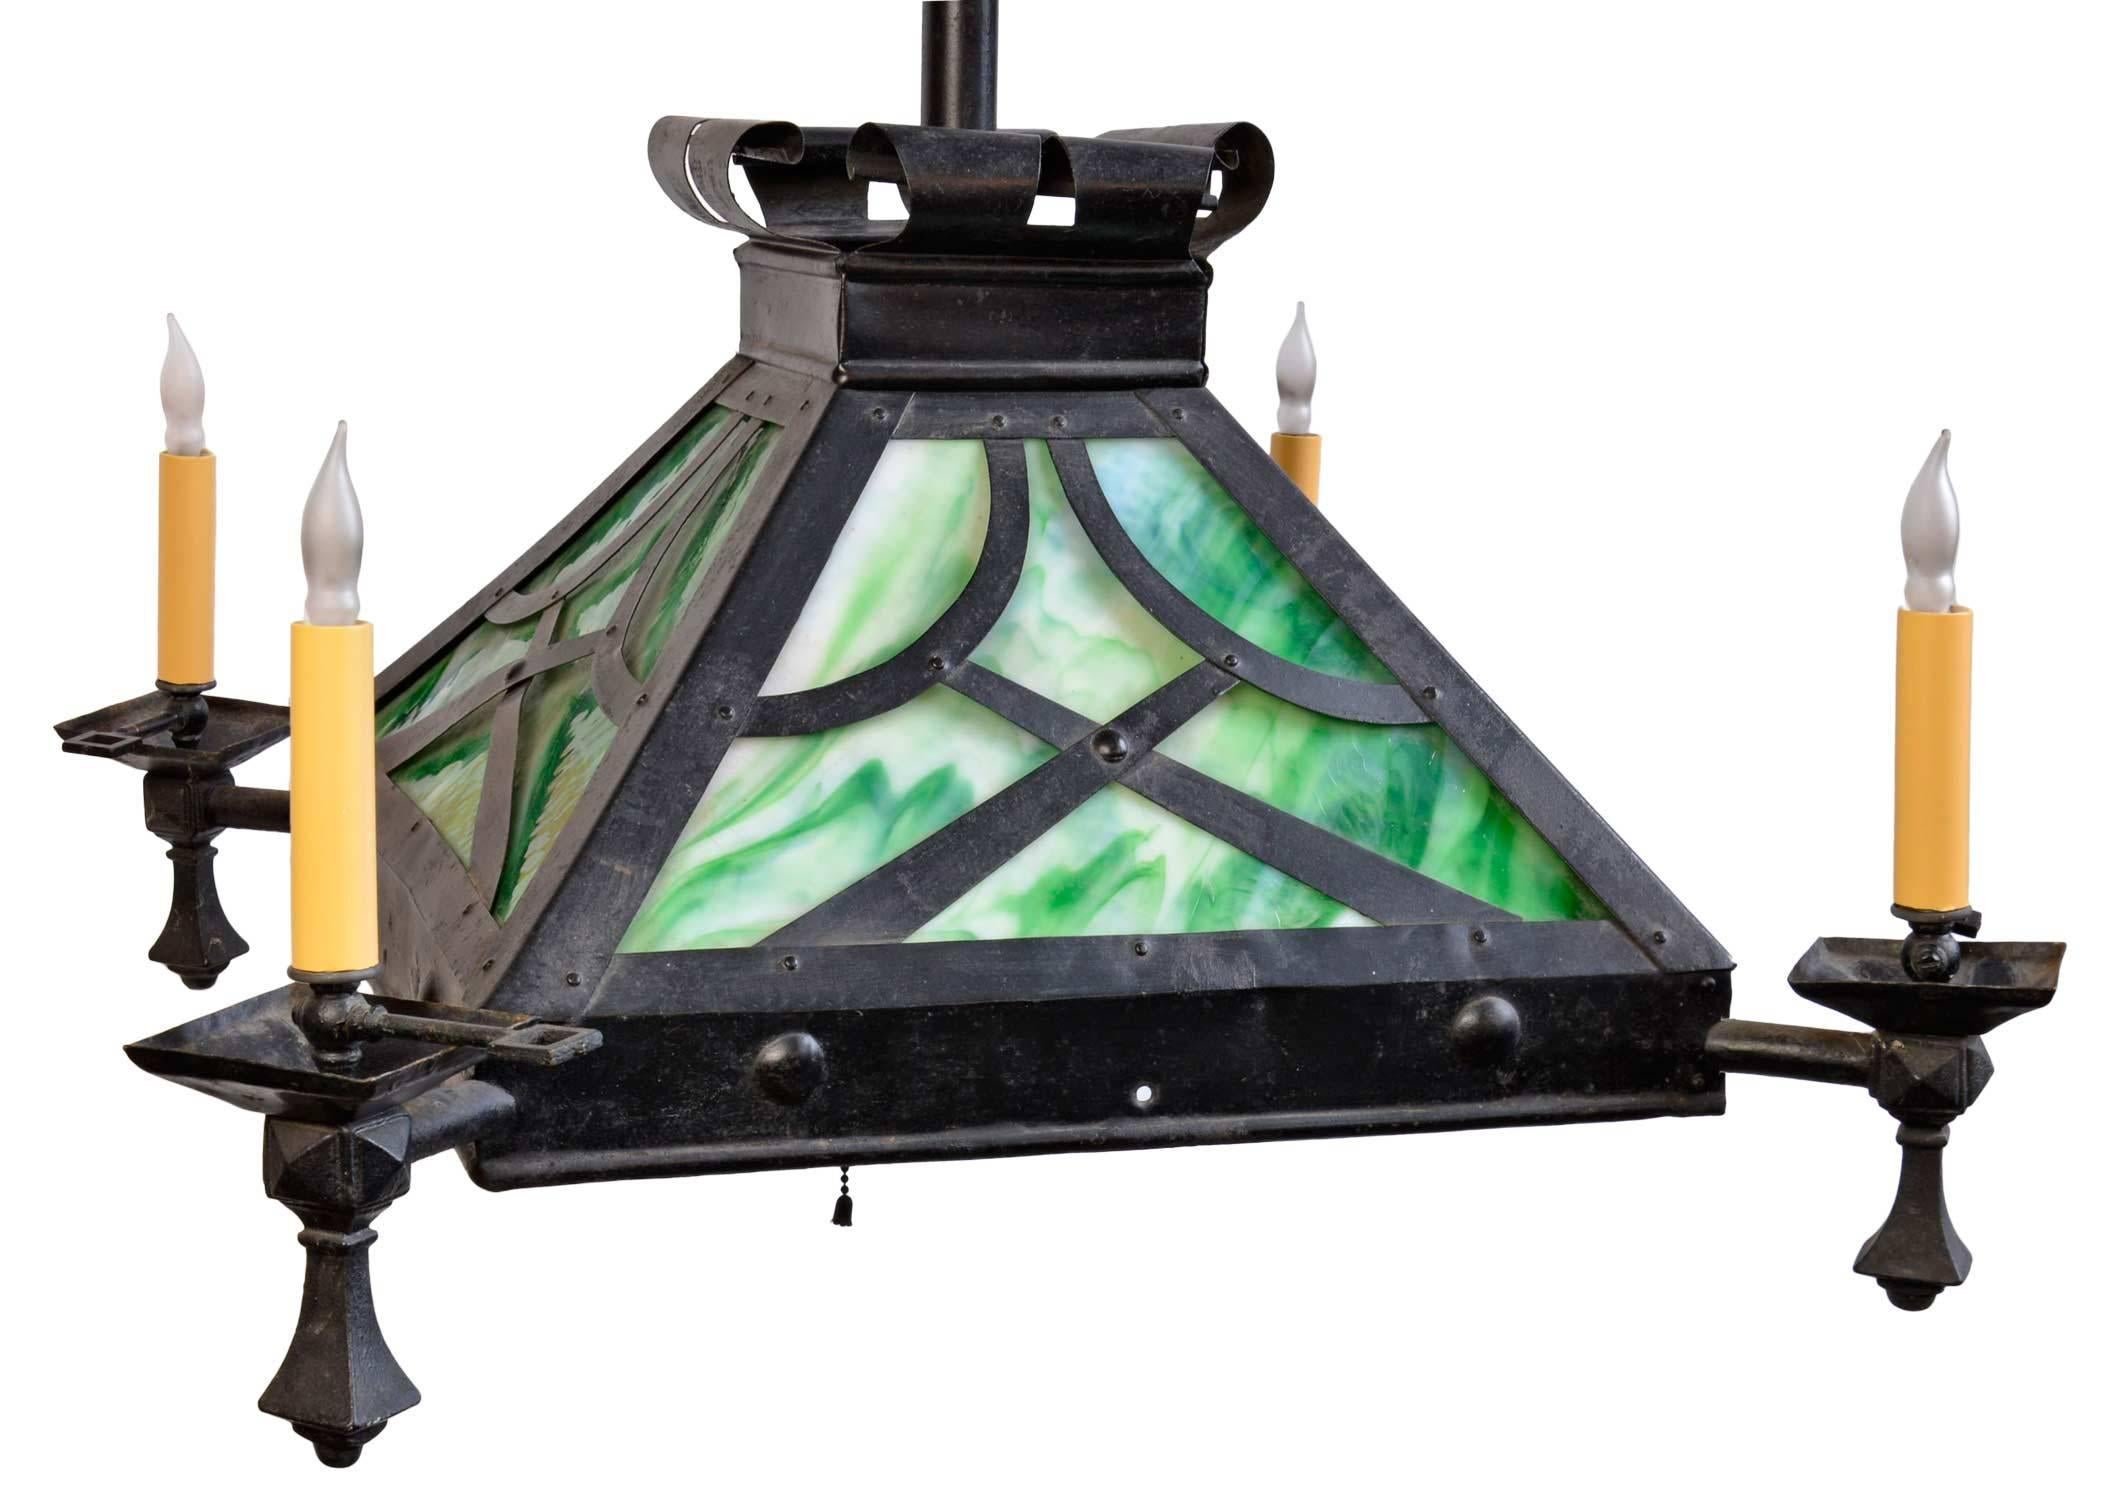 This early original American Craftsman style fixture in iron features  emerald green slag glass, iron finials, gas keys, and original canopy. The four arms and the center light within have been converted to electric and the fixture is ready to